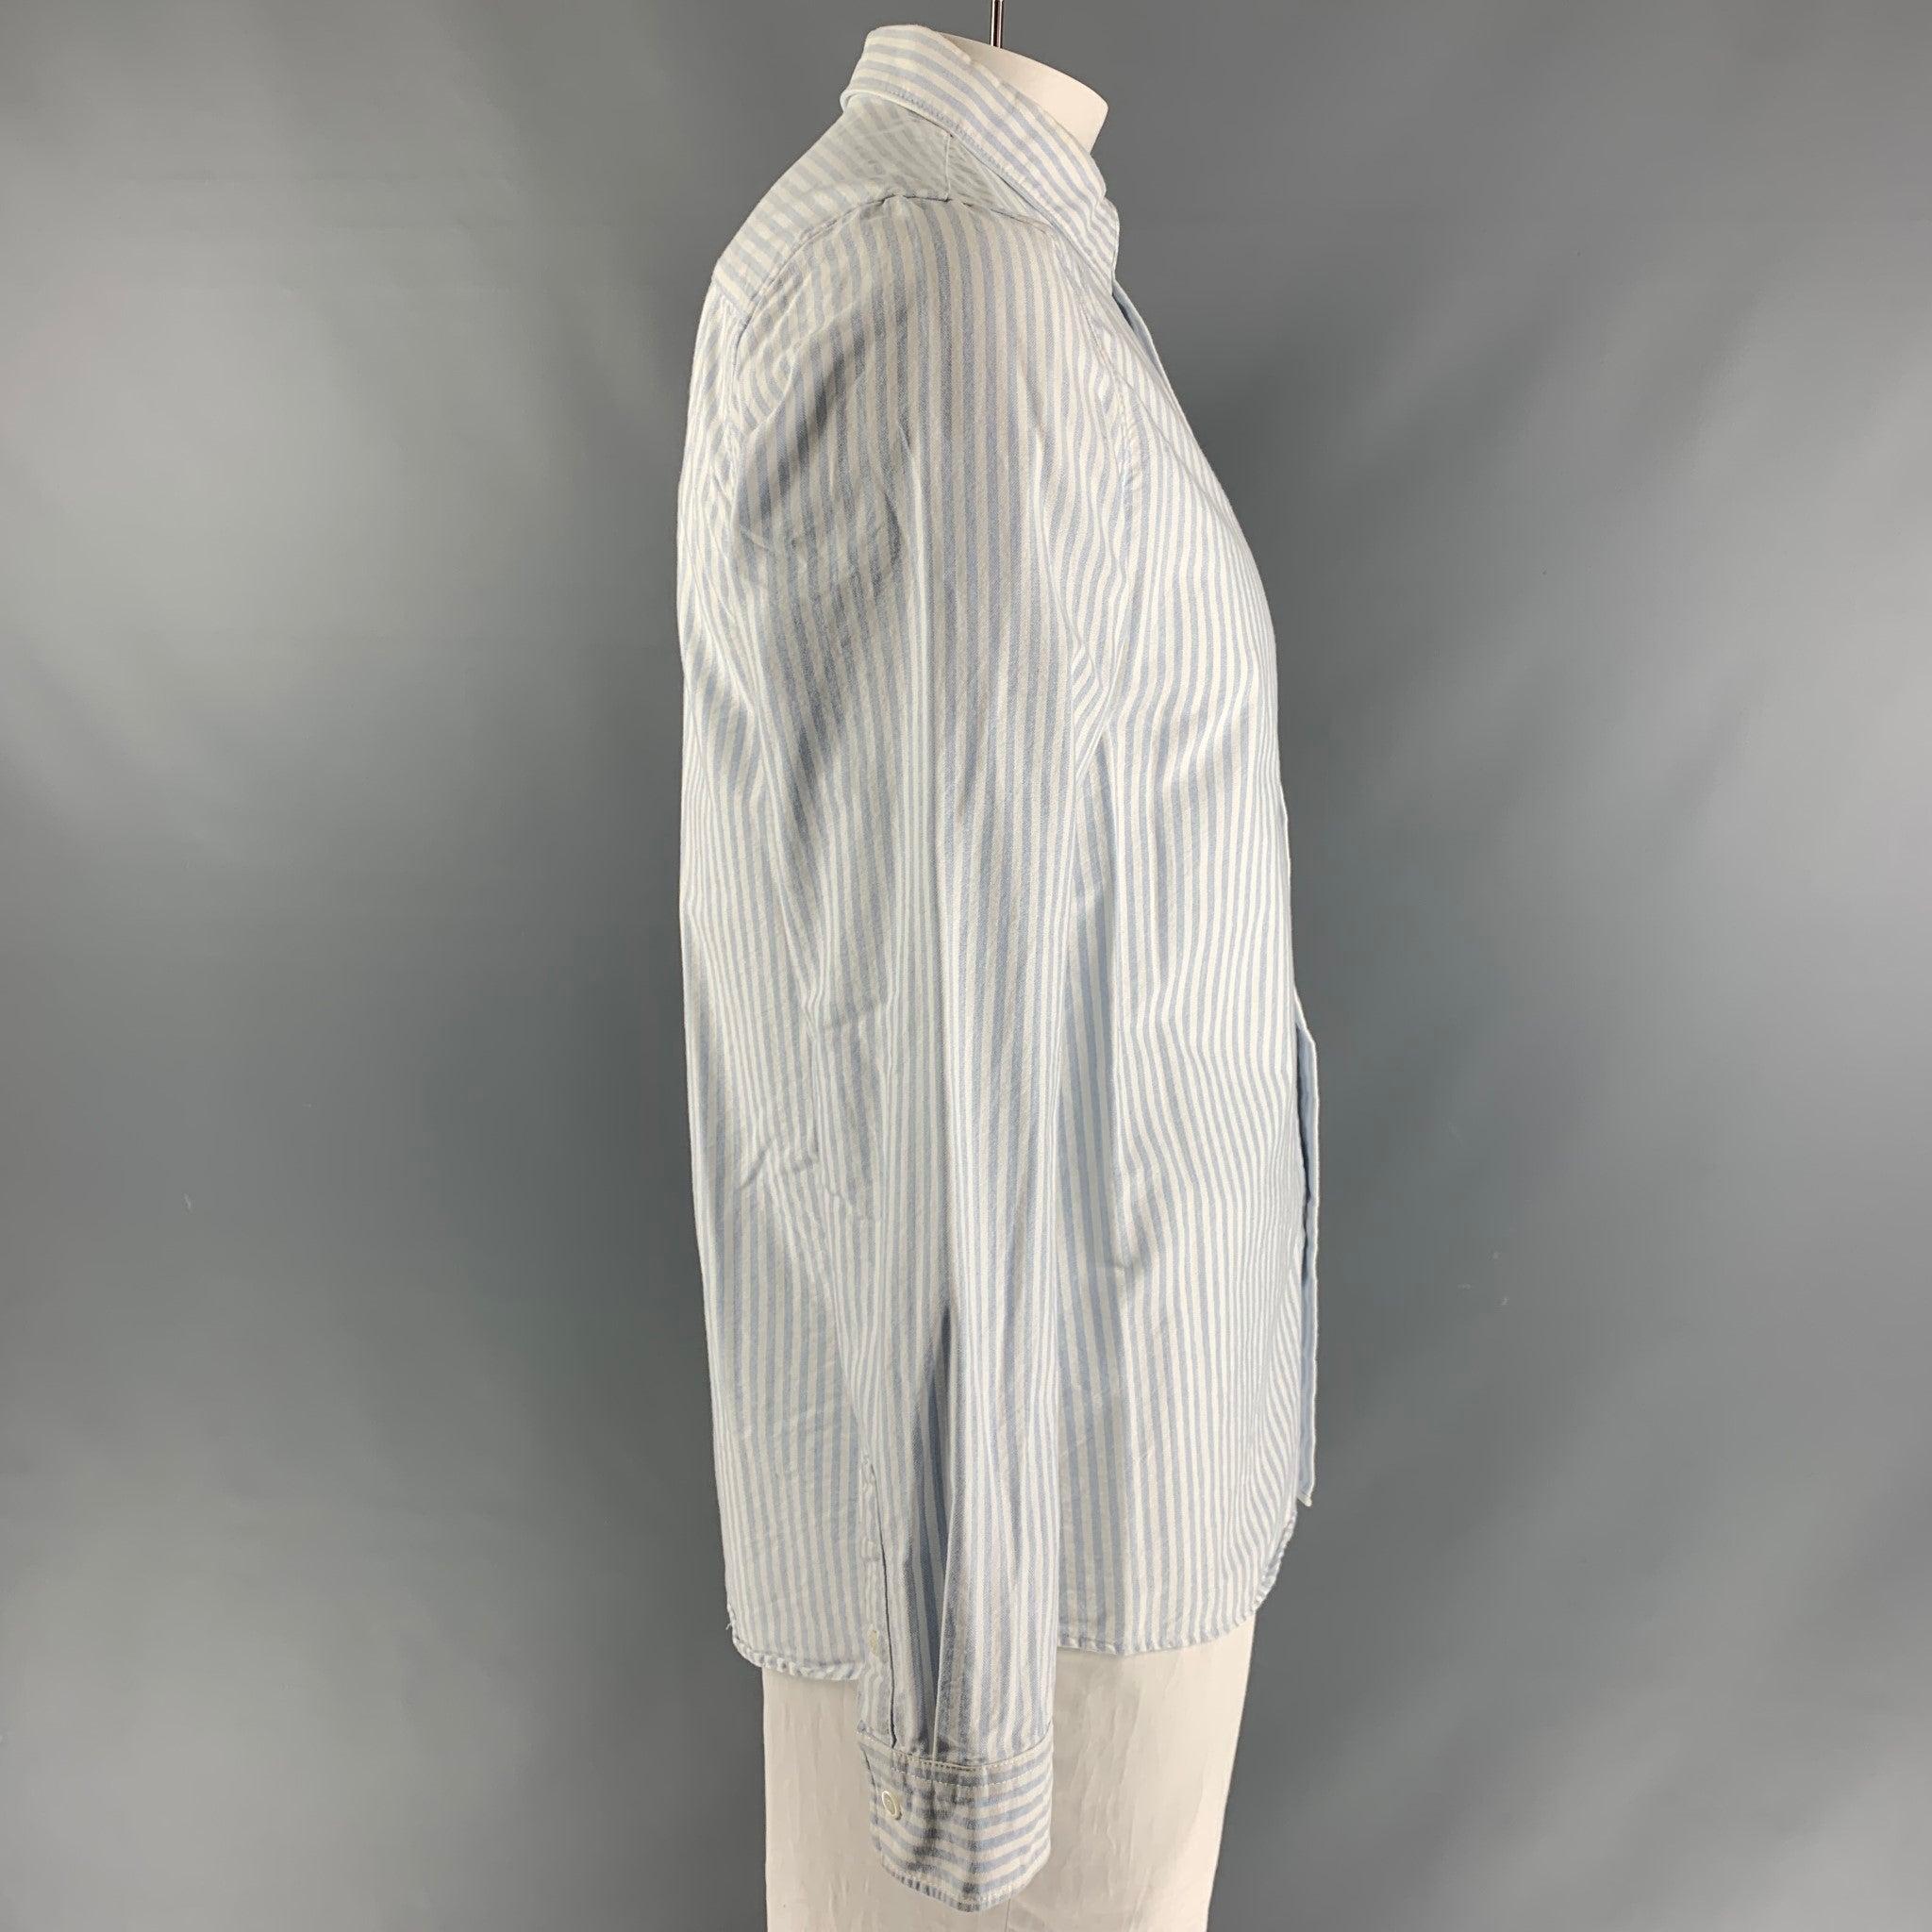 A.P.C. long sleeve shirt comes in blue and white stripped cotton featuring straight collar, button up closure and frontal pocket.Very Good Pre-Owned Condition. Minor discoloration at inside collar. 

Marked:   XL 

Measurements: 
 
Shoulder: 18